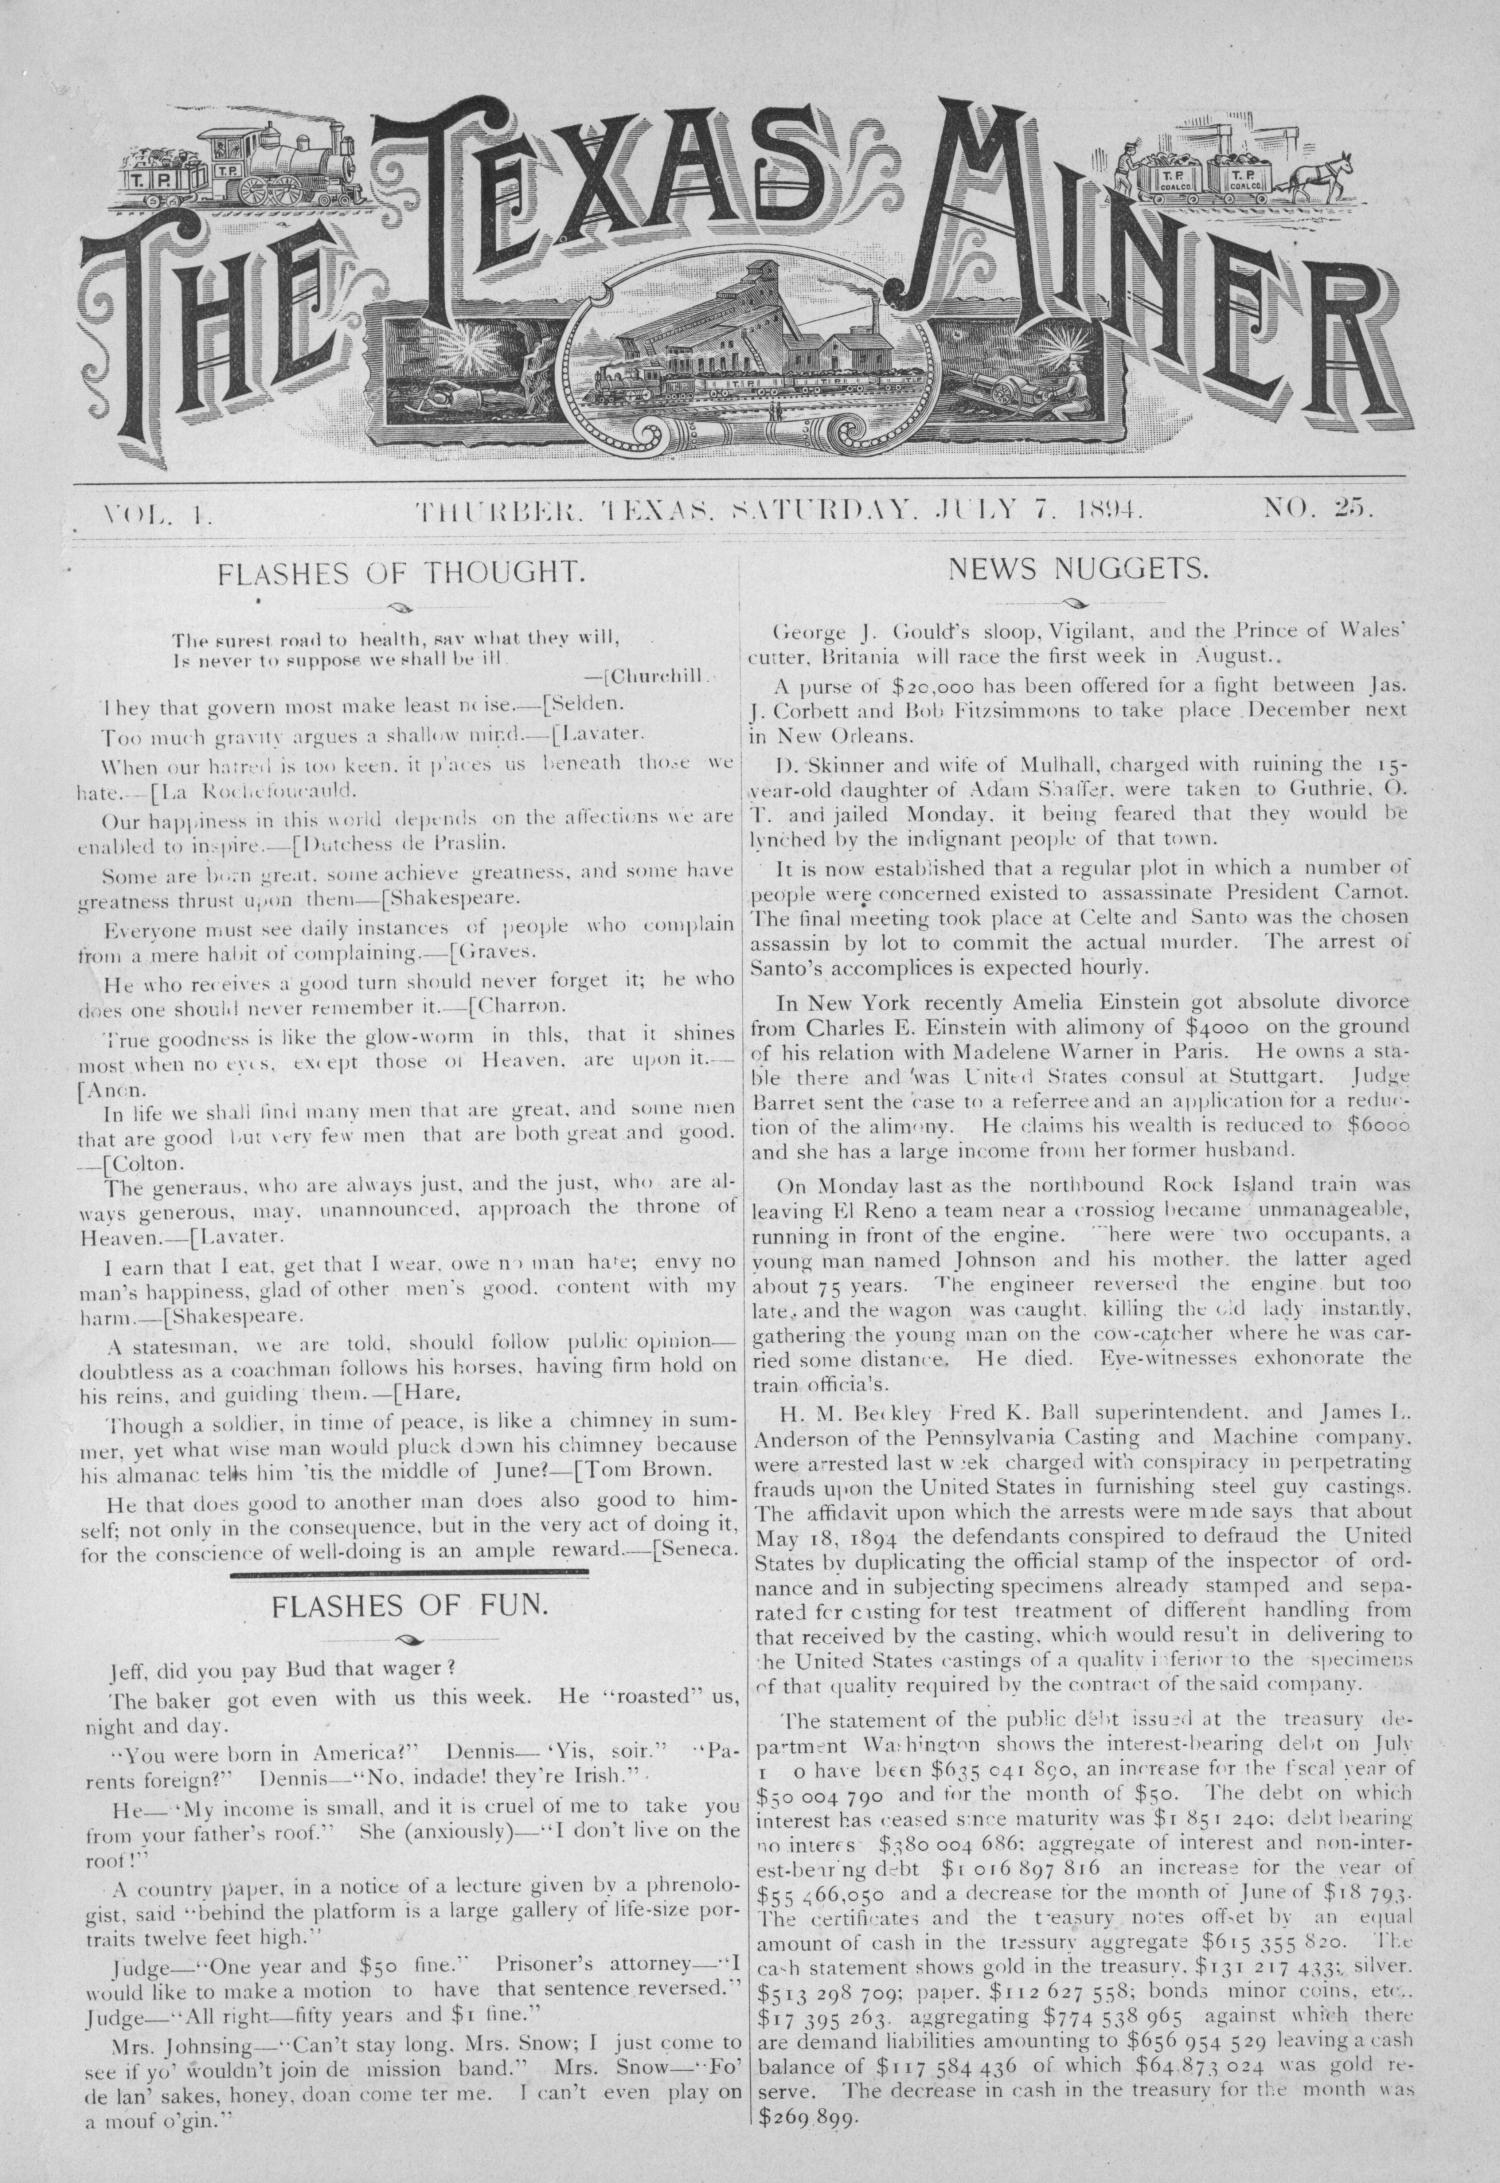 The Texas Miner, Volume 1, Number 25, July 7, 1894
                                                
                                                    1
                                                